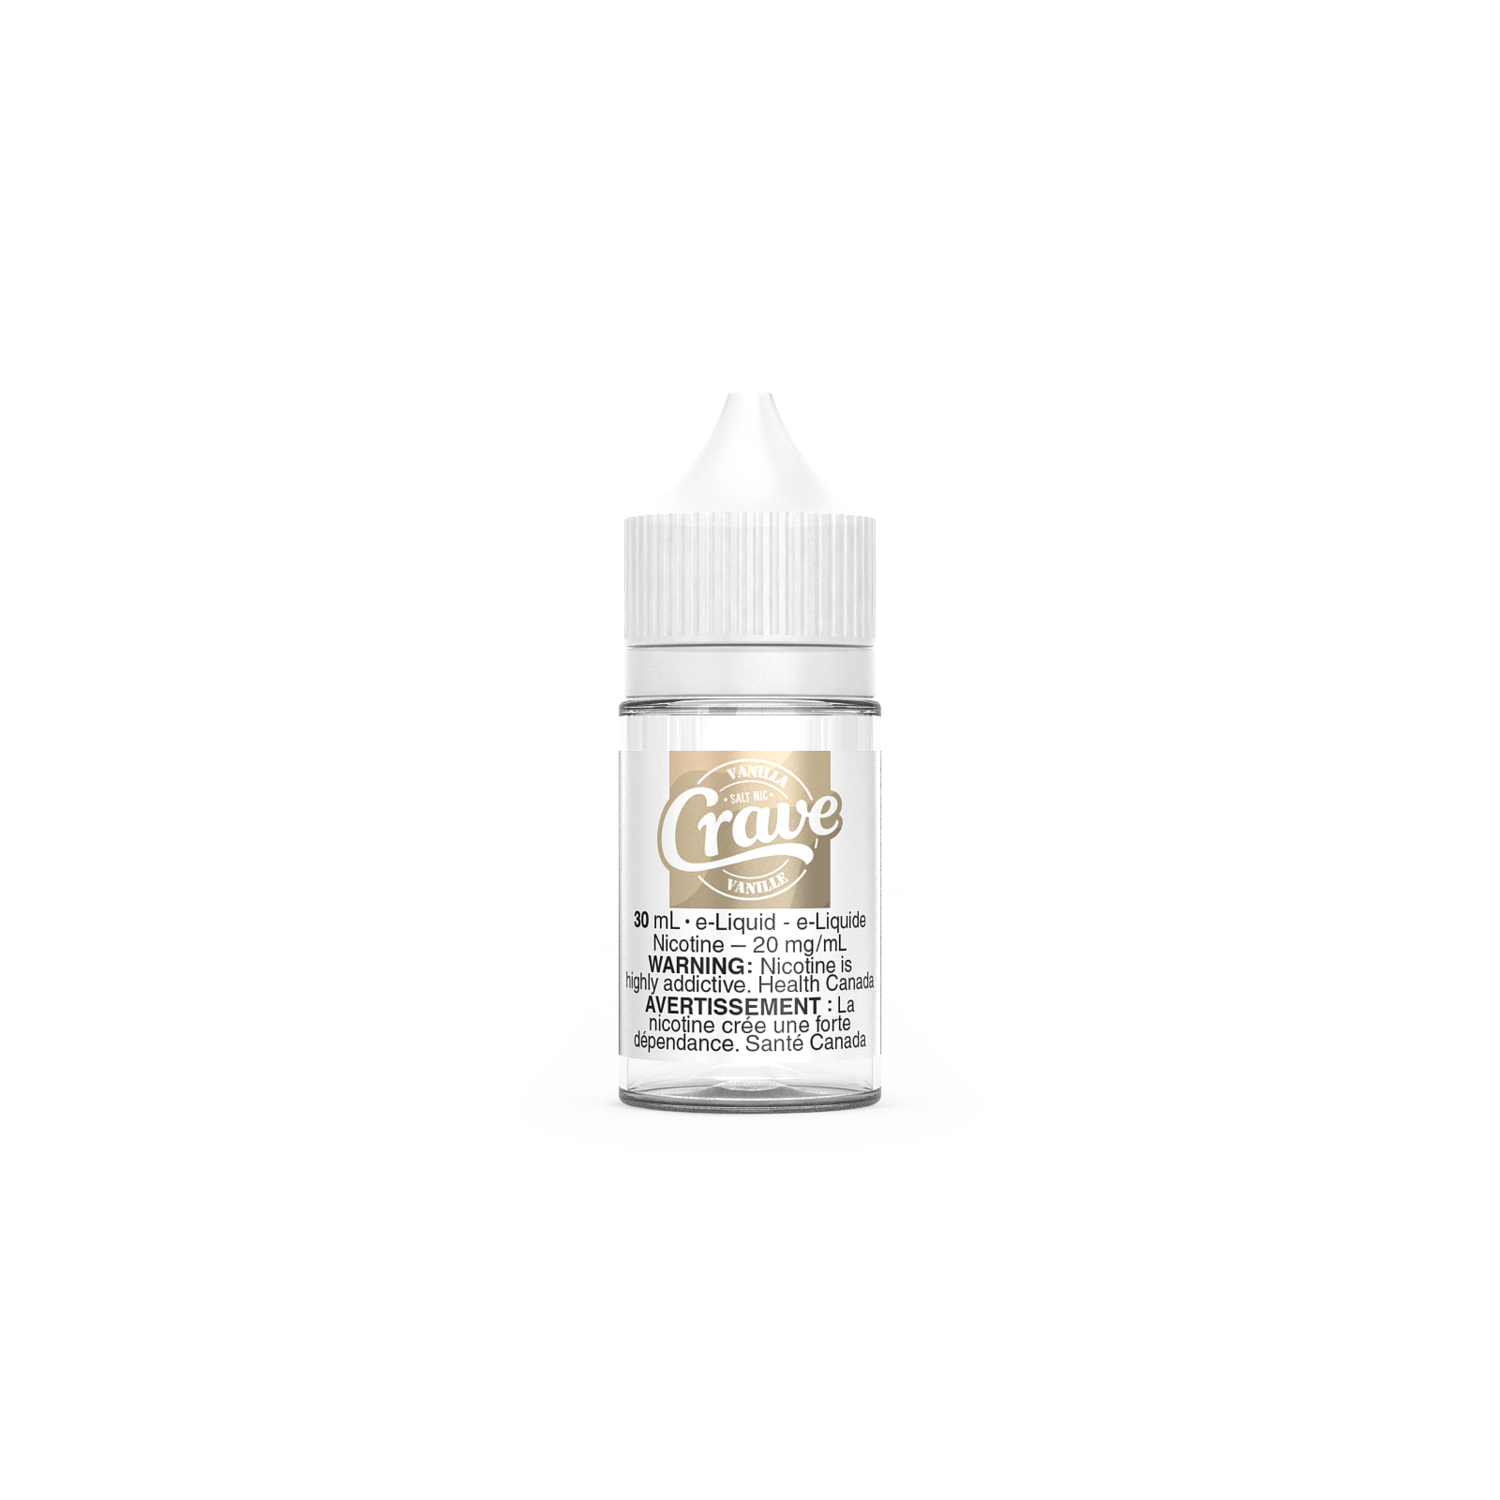 Crave 30ML, flavour-NicLevel: Vanilla 12mg